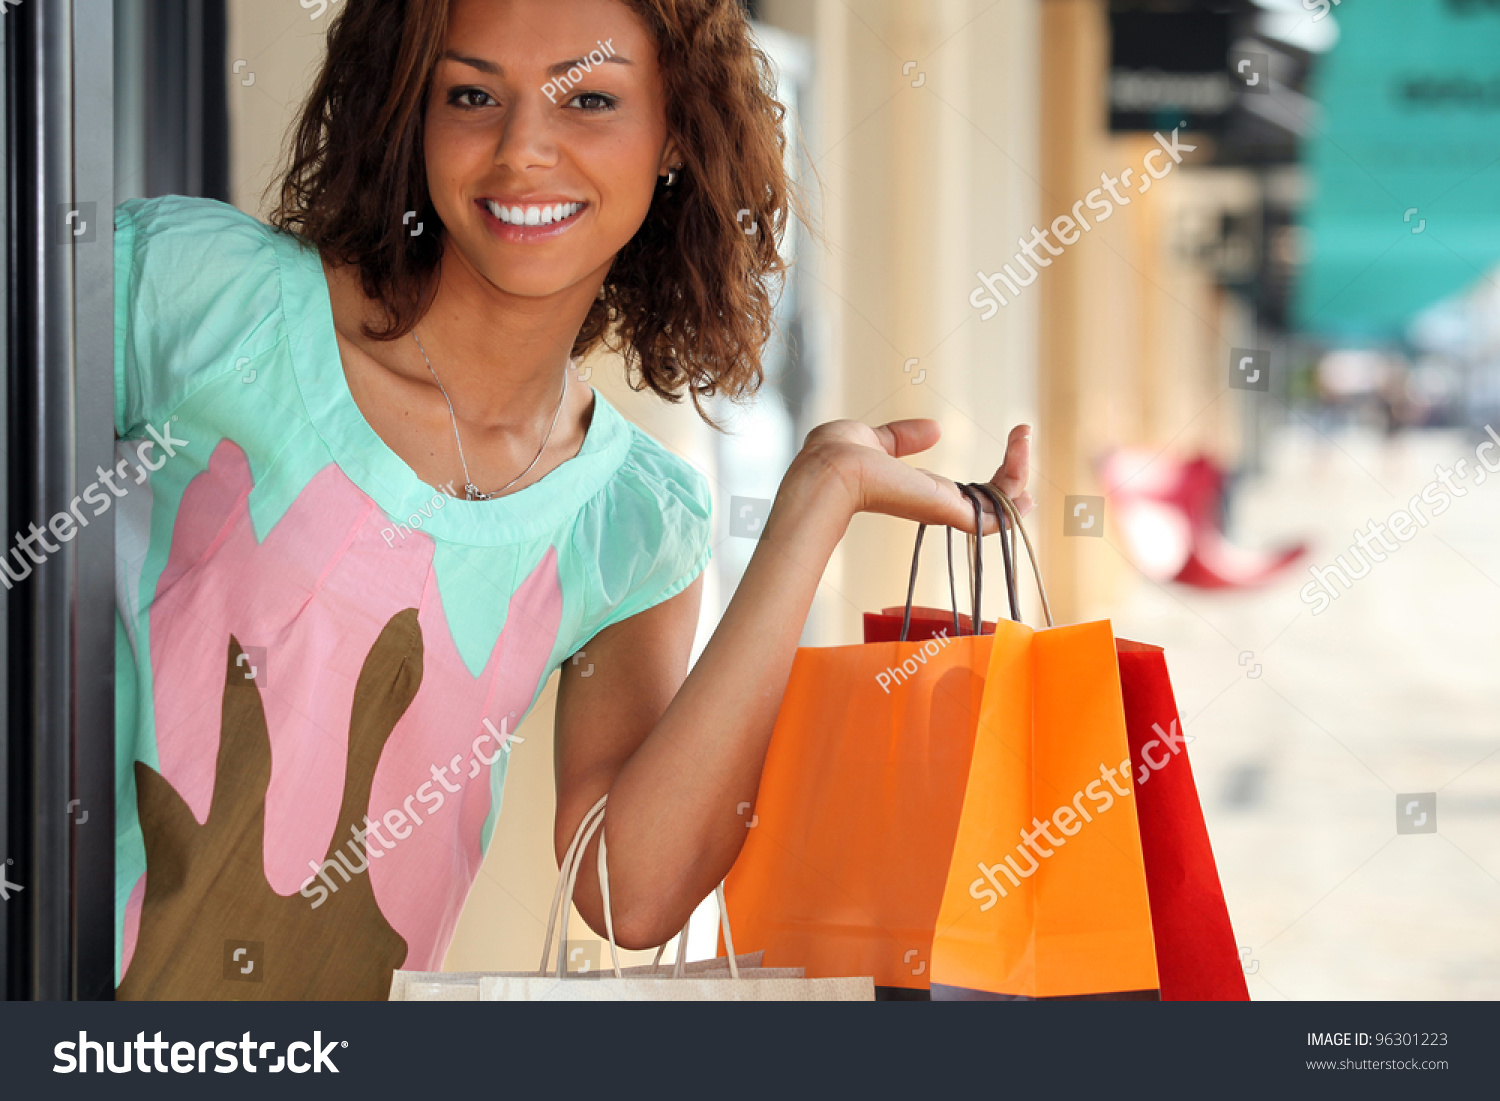 Woman Leaving Store With Shopping Bags Stock Photo 96301223 : Shutterstock